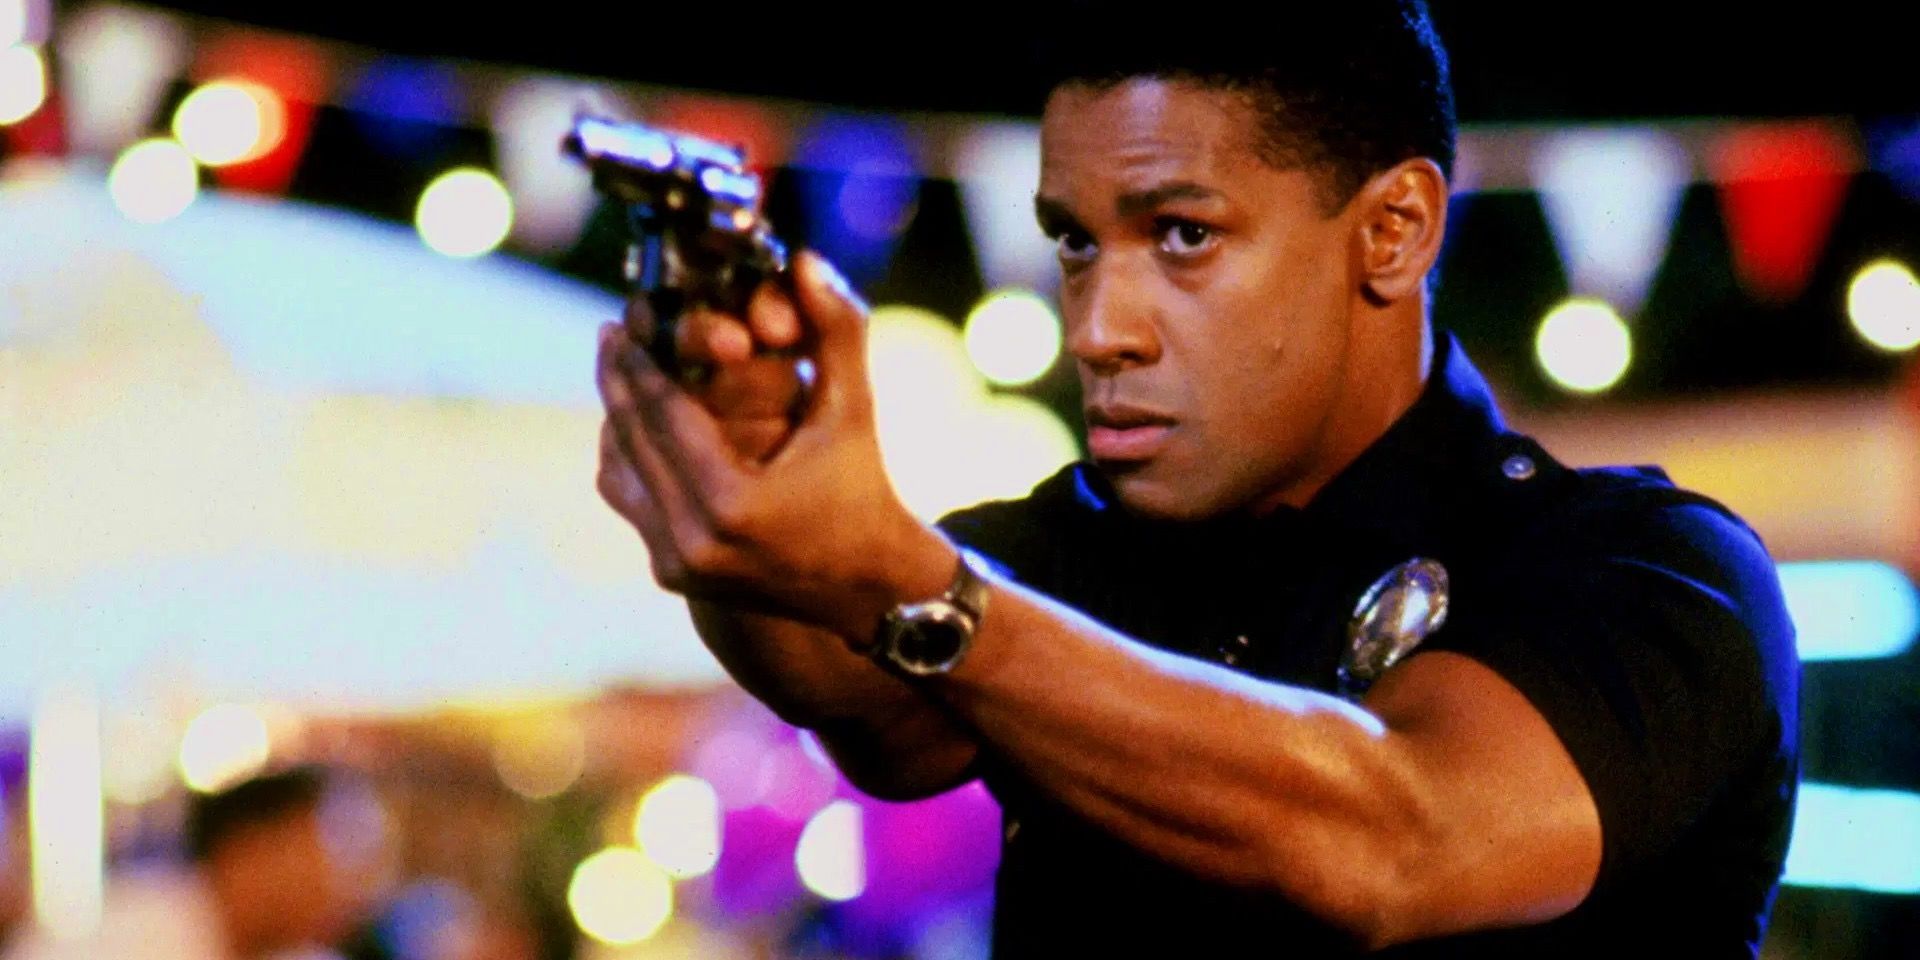 Denzel Washington as Styles pointing a revolver and wearing a police uniform in Ricochet